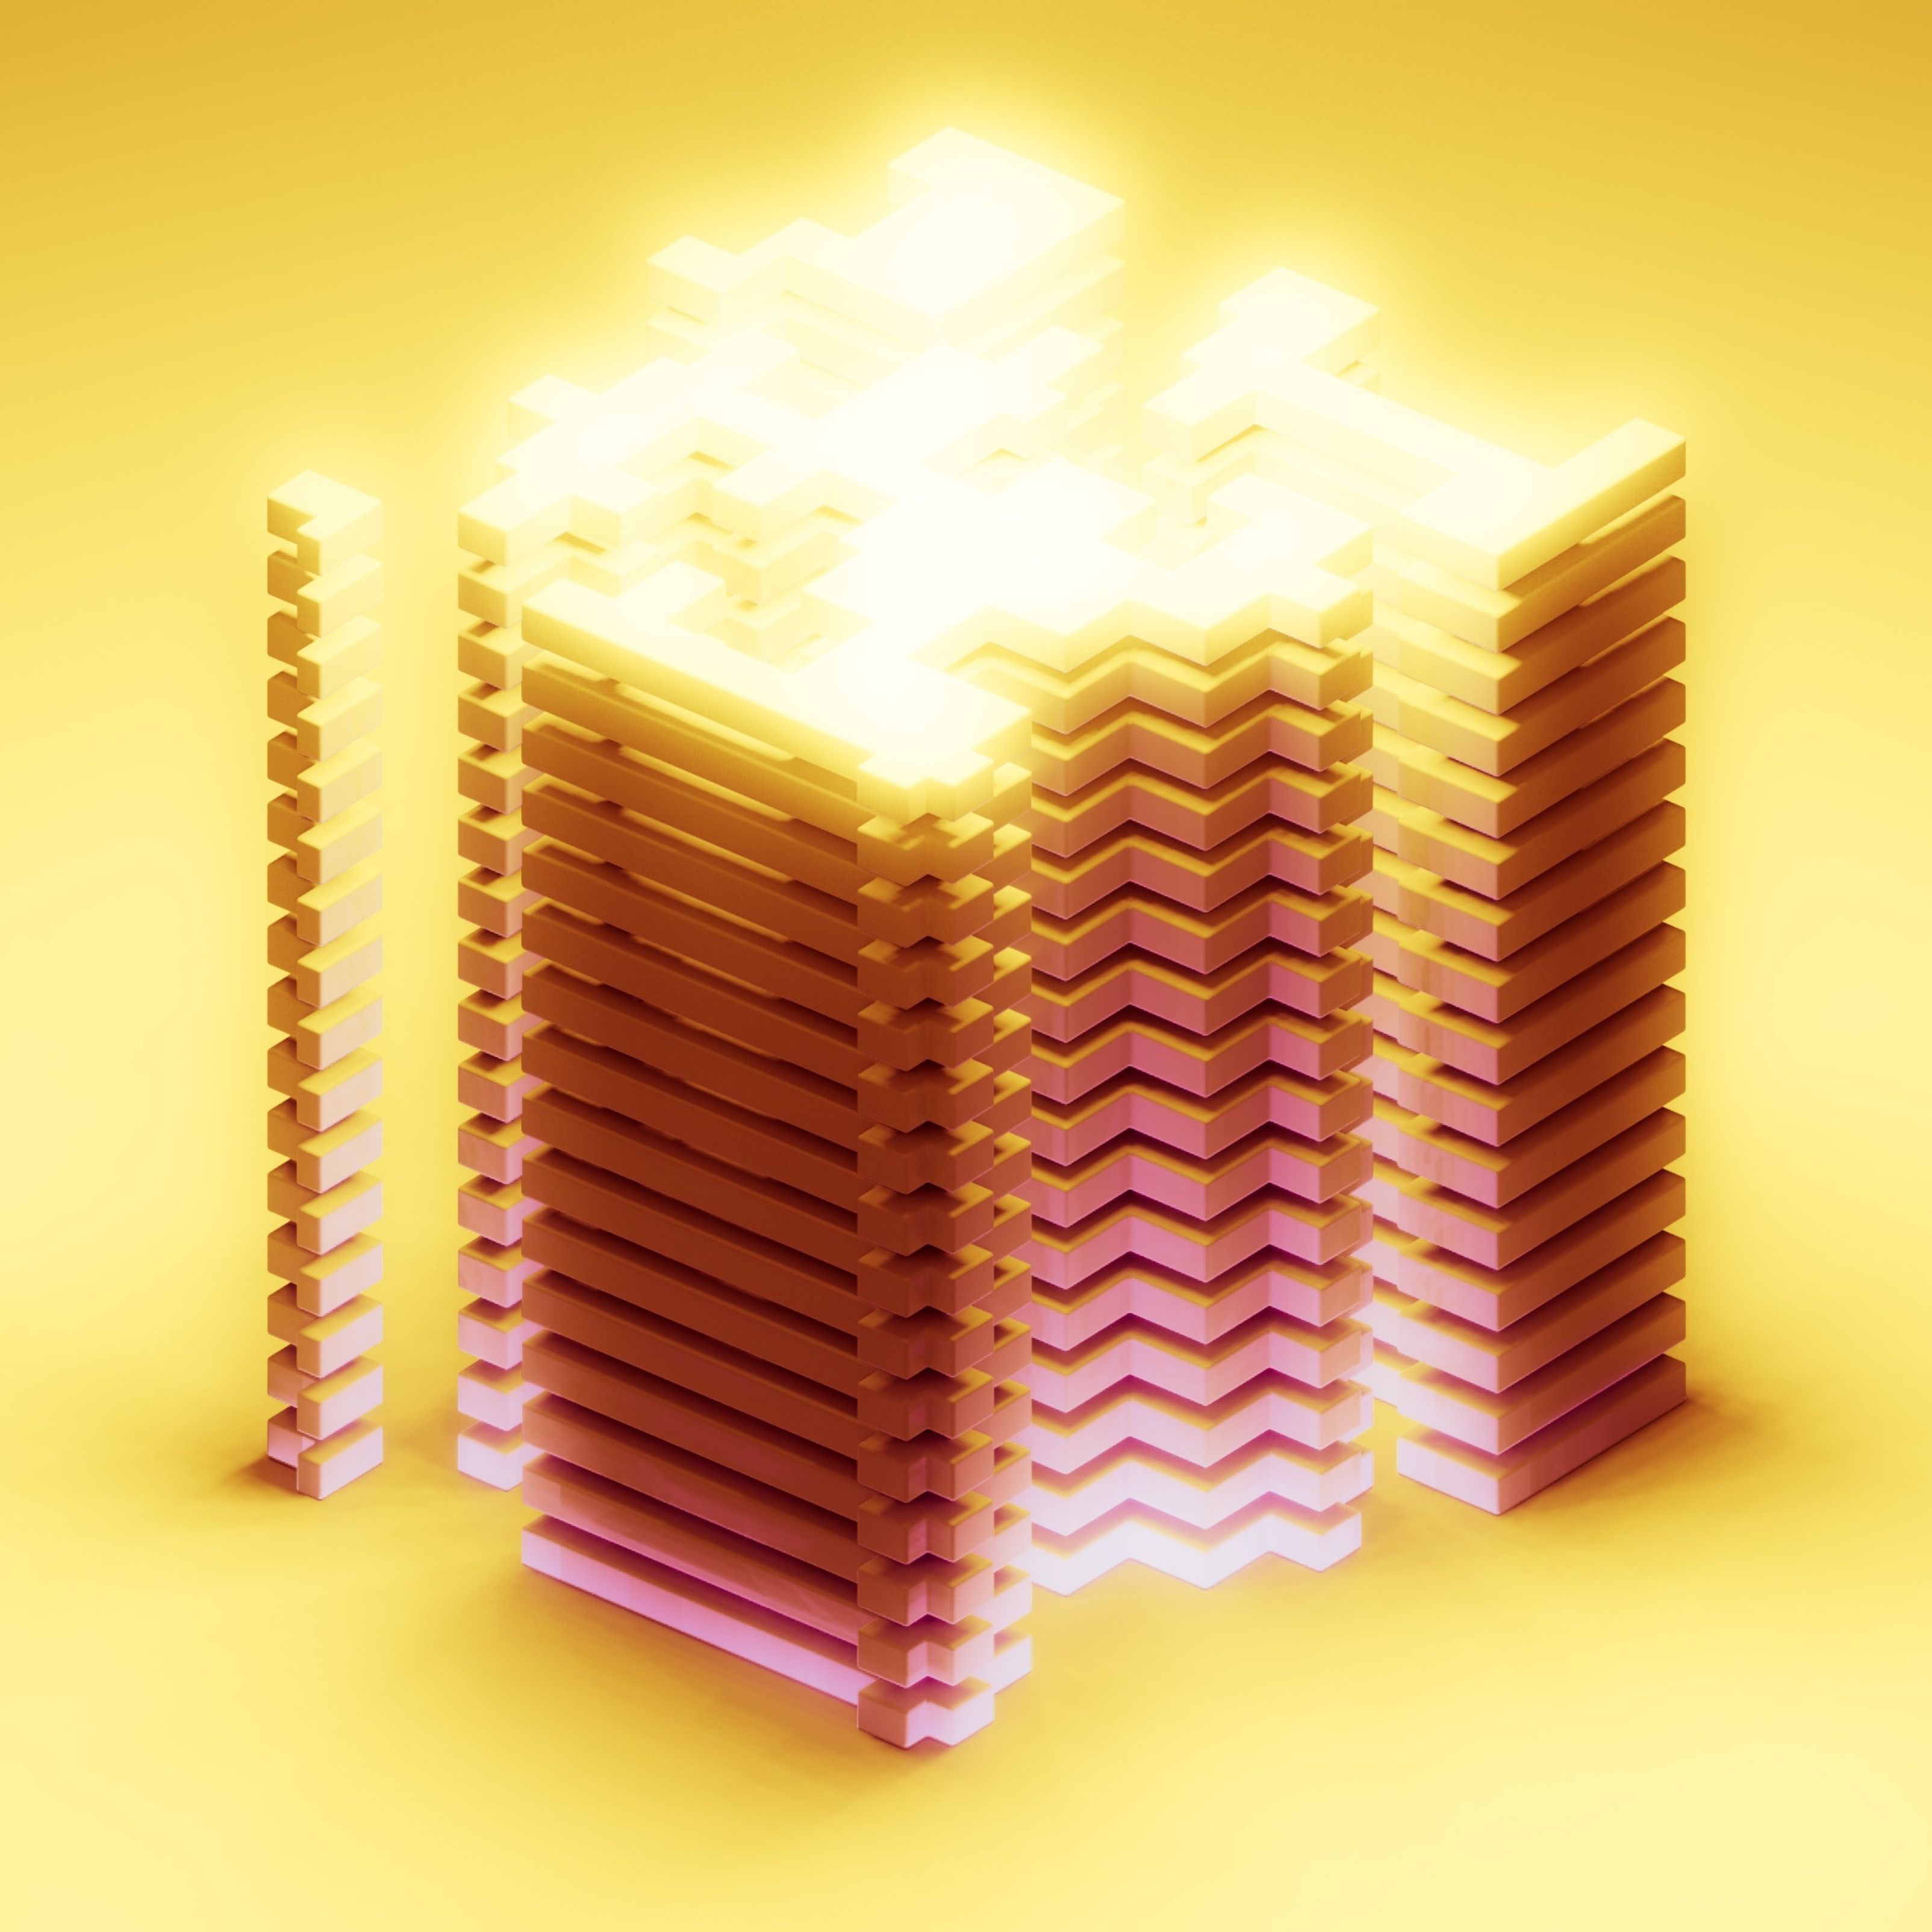 iPad Wallpapers 3D Building Yellow Background iPad Wallpaper 3208x3208 px